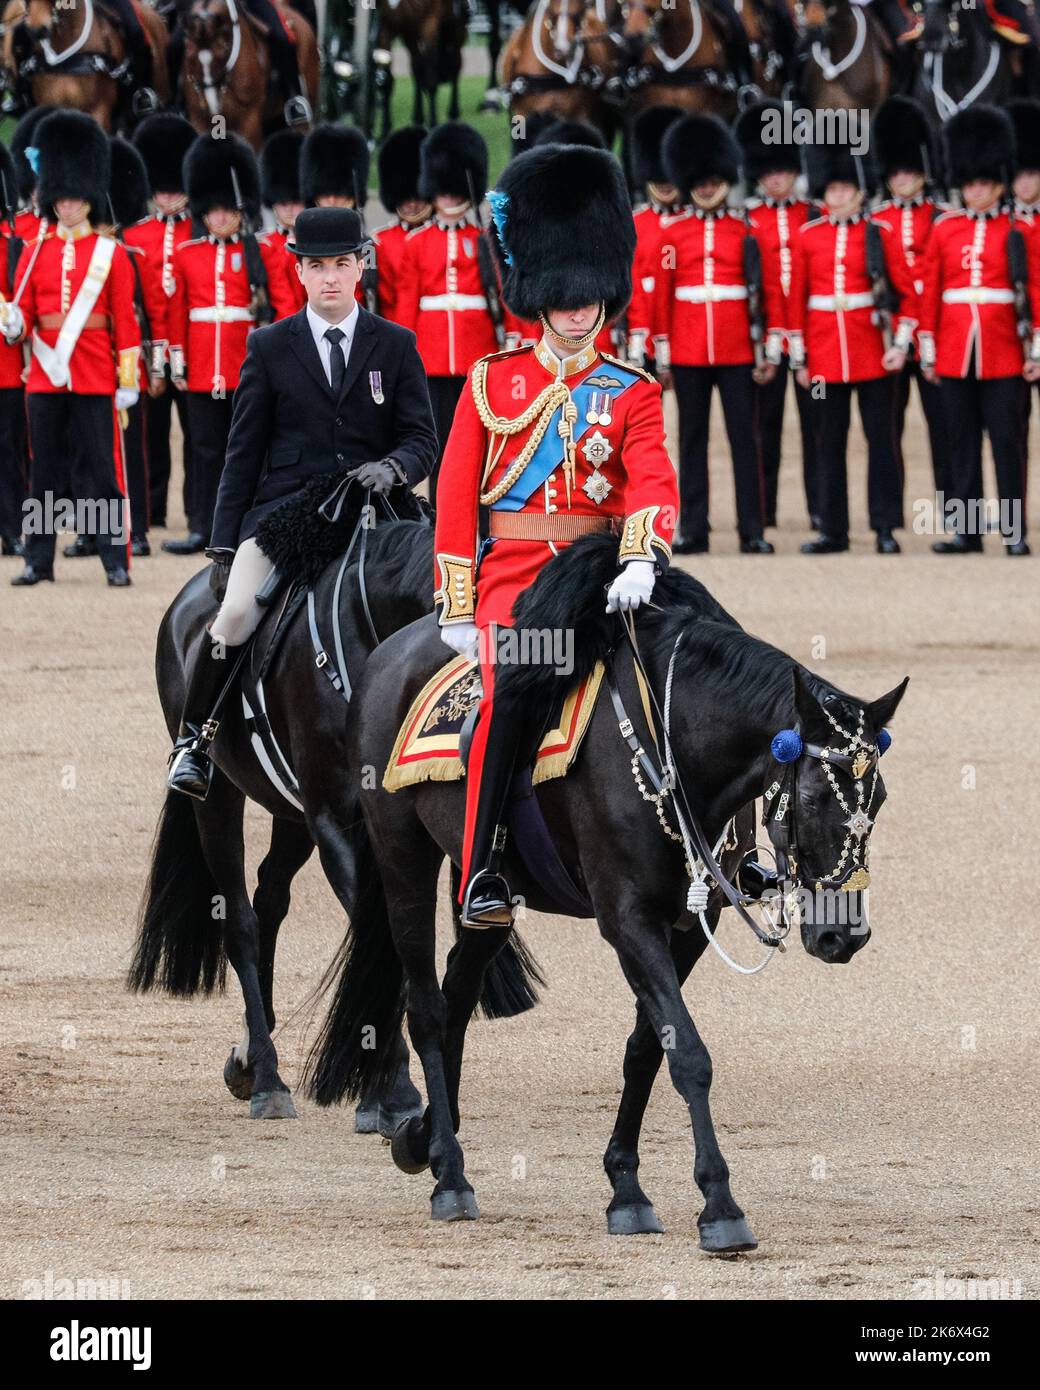 Prince William, now the Prince of Wales, in  ceremonial uniform of the Irish Guards on horseback, the Colonel's Review,  Trooping the Colour, London Stock Photo